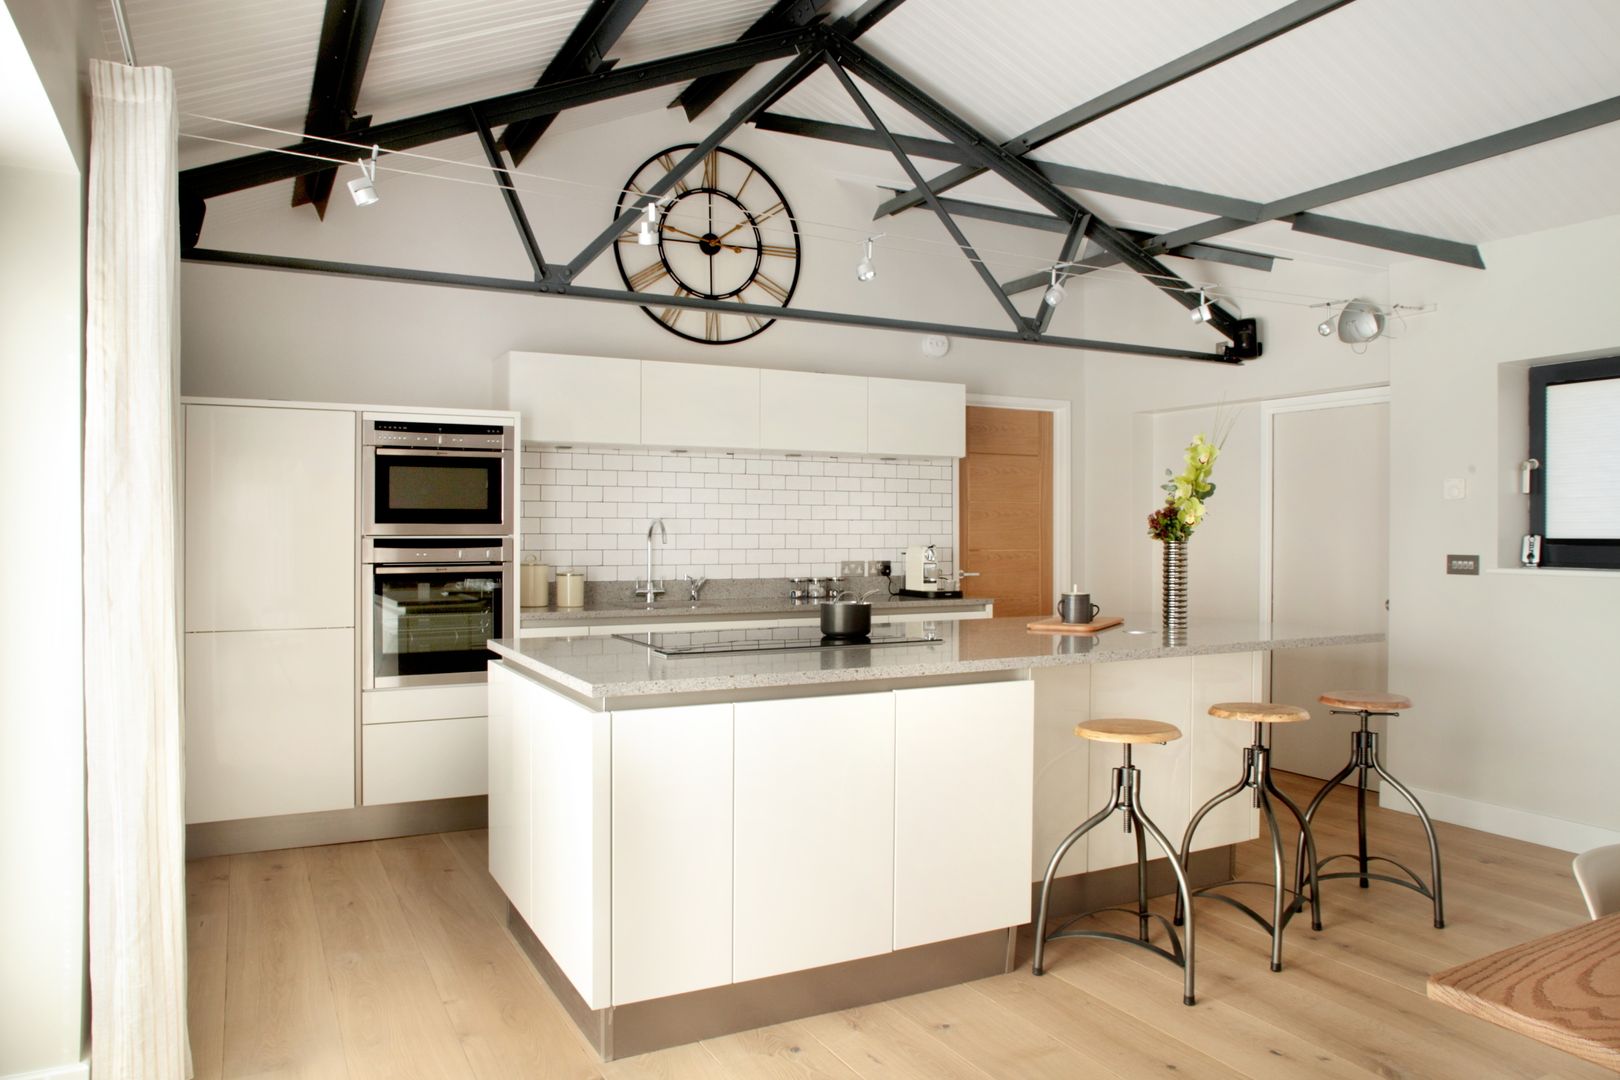 The Cow Shed Barn Conversion Kitchen in-toto Kitchens Design Studio Marlow مطبخ